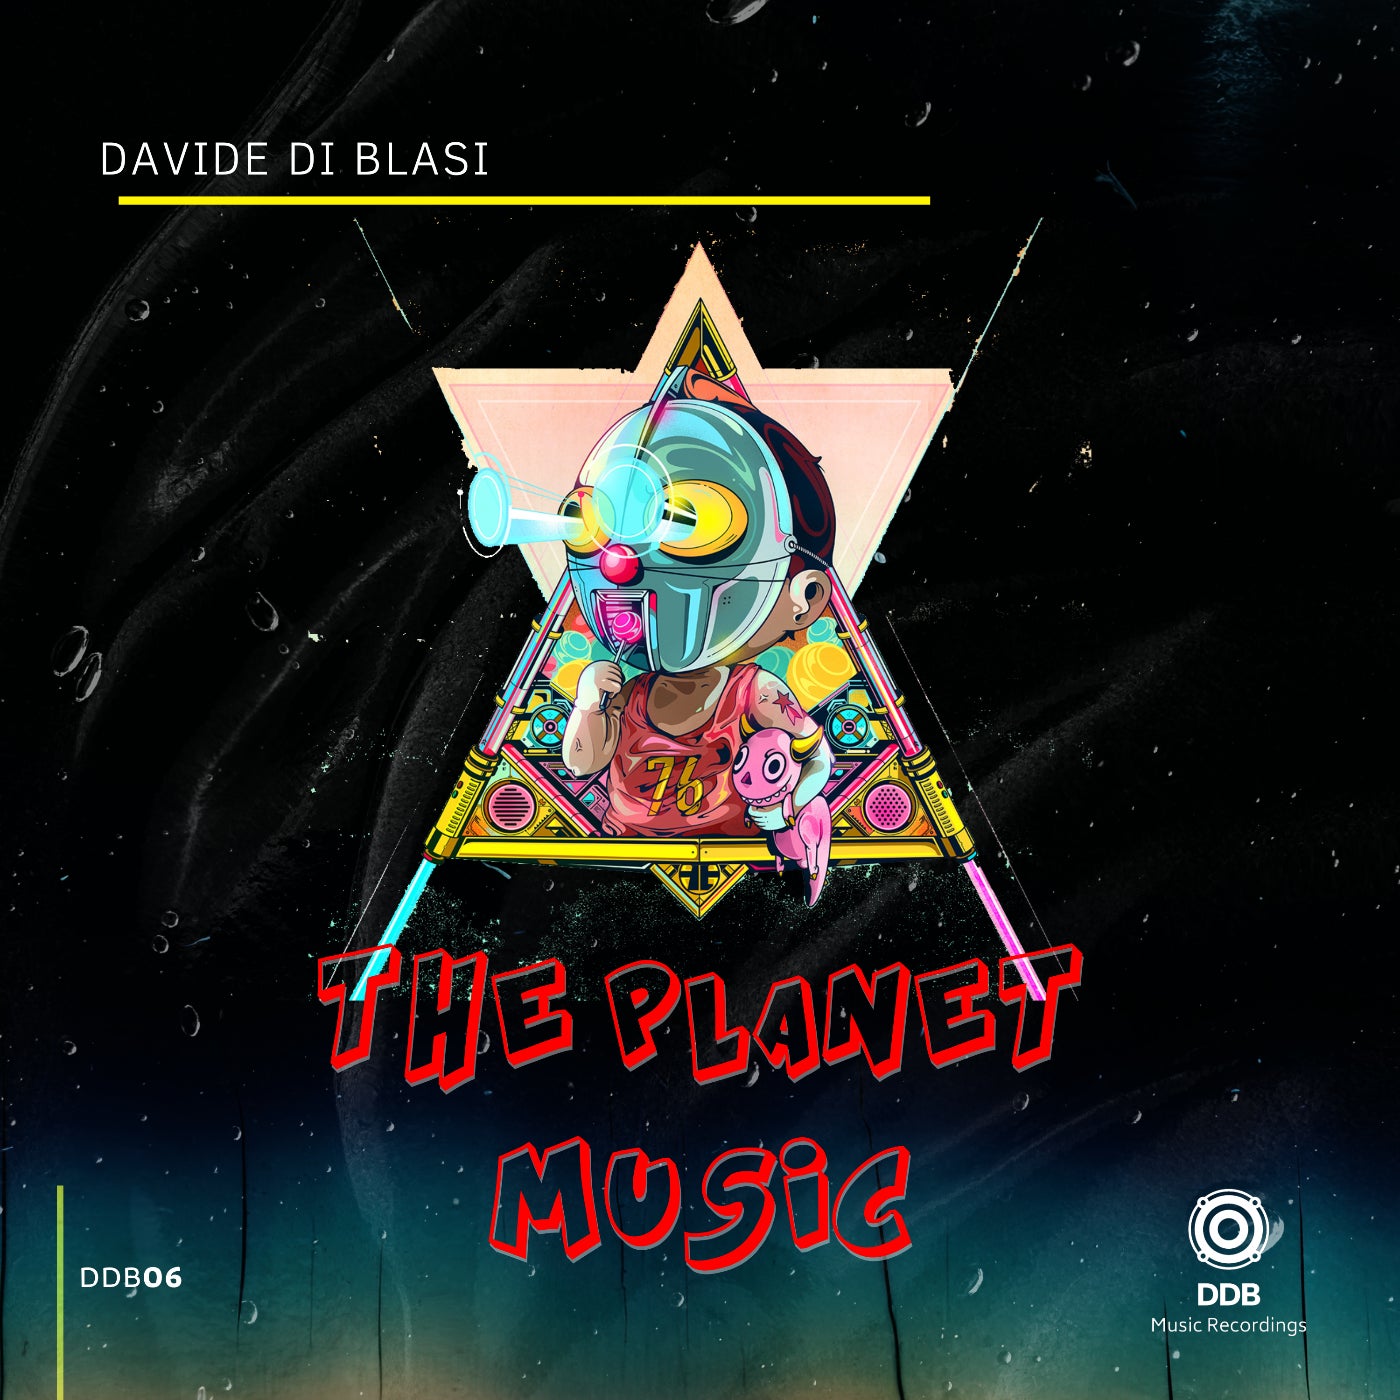 The Planet Music